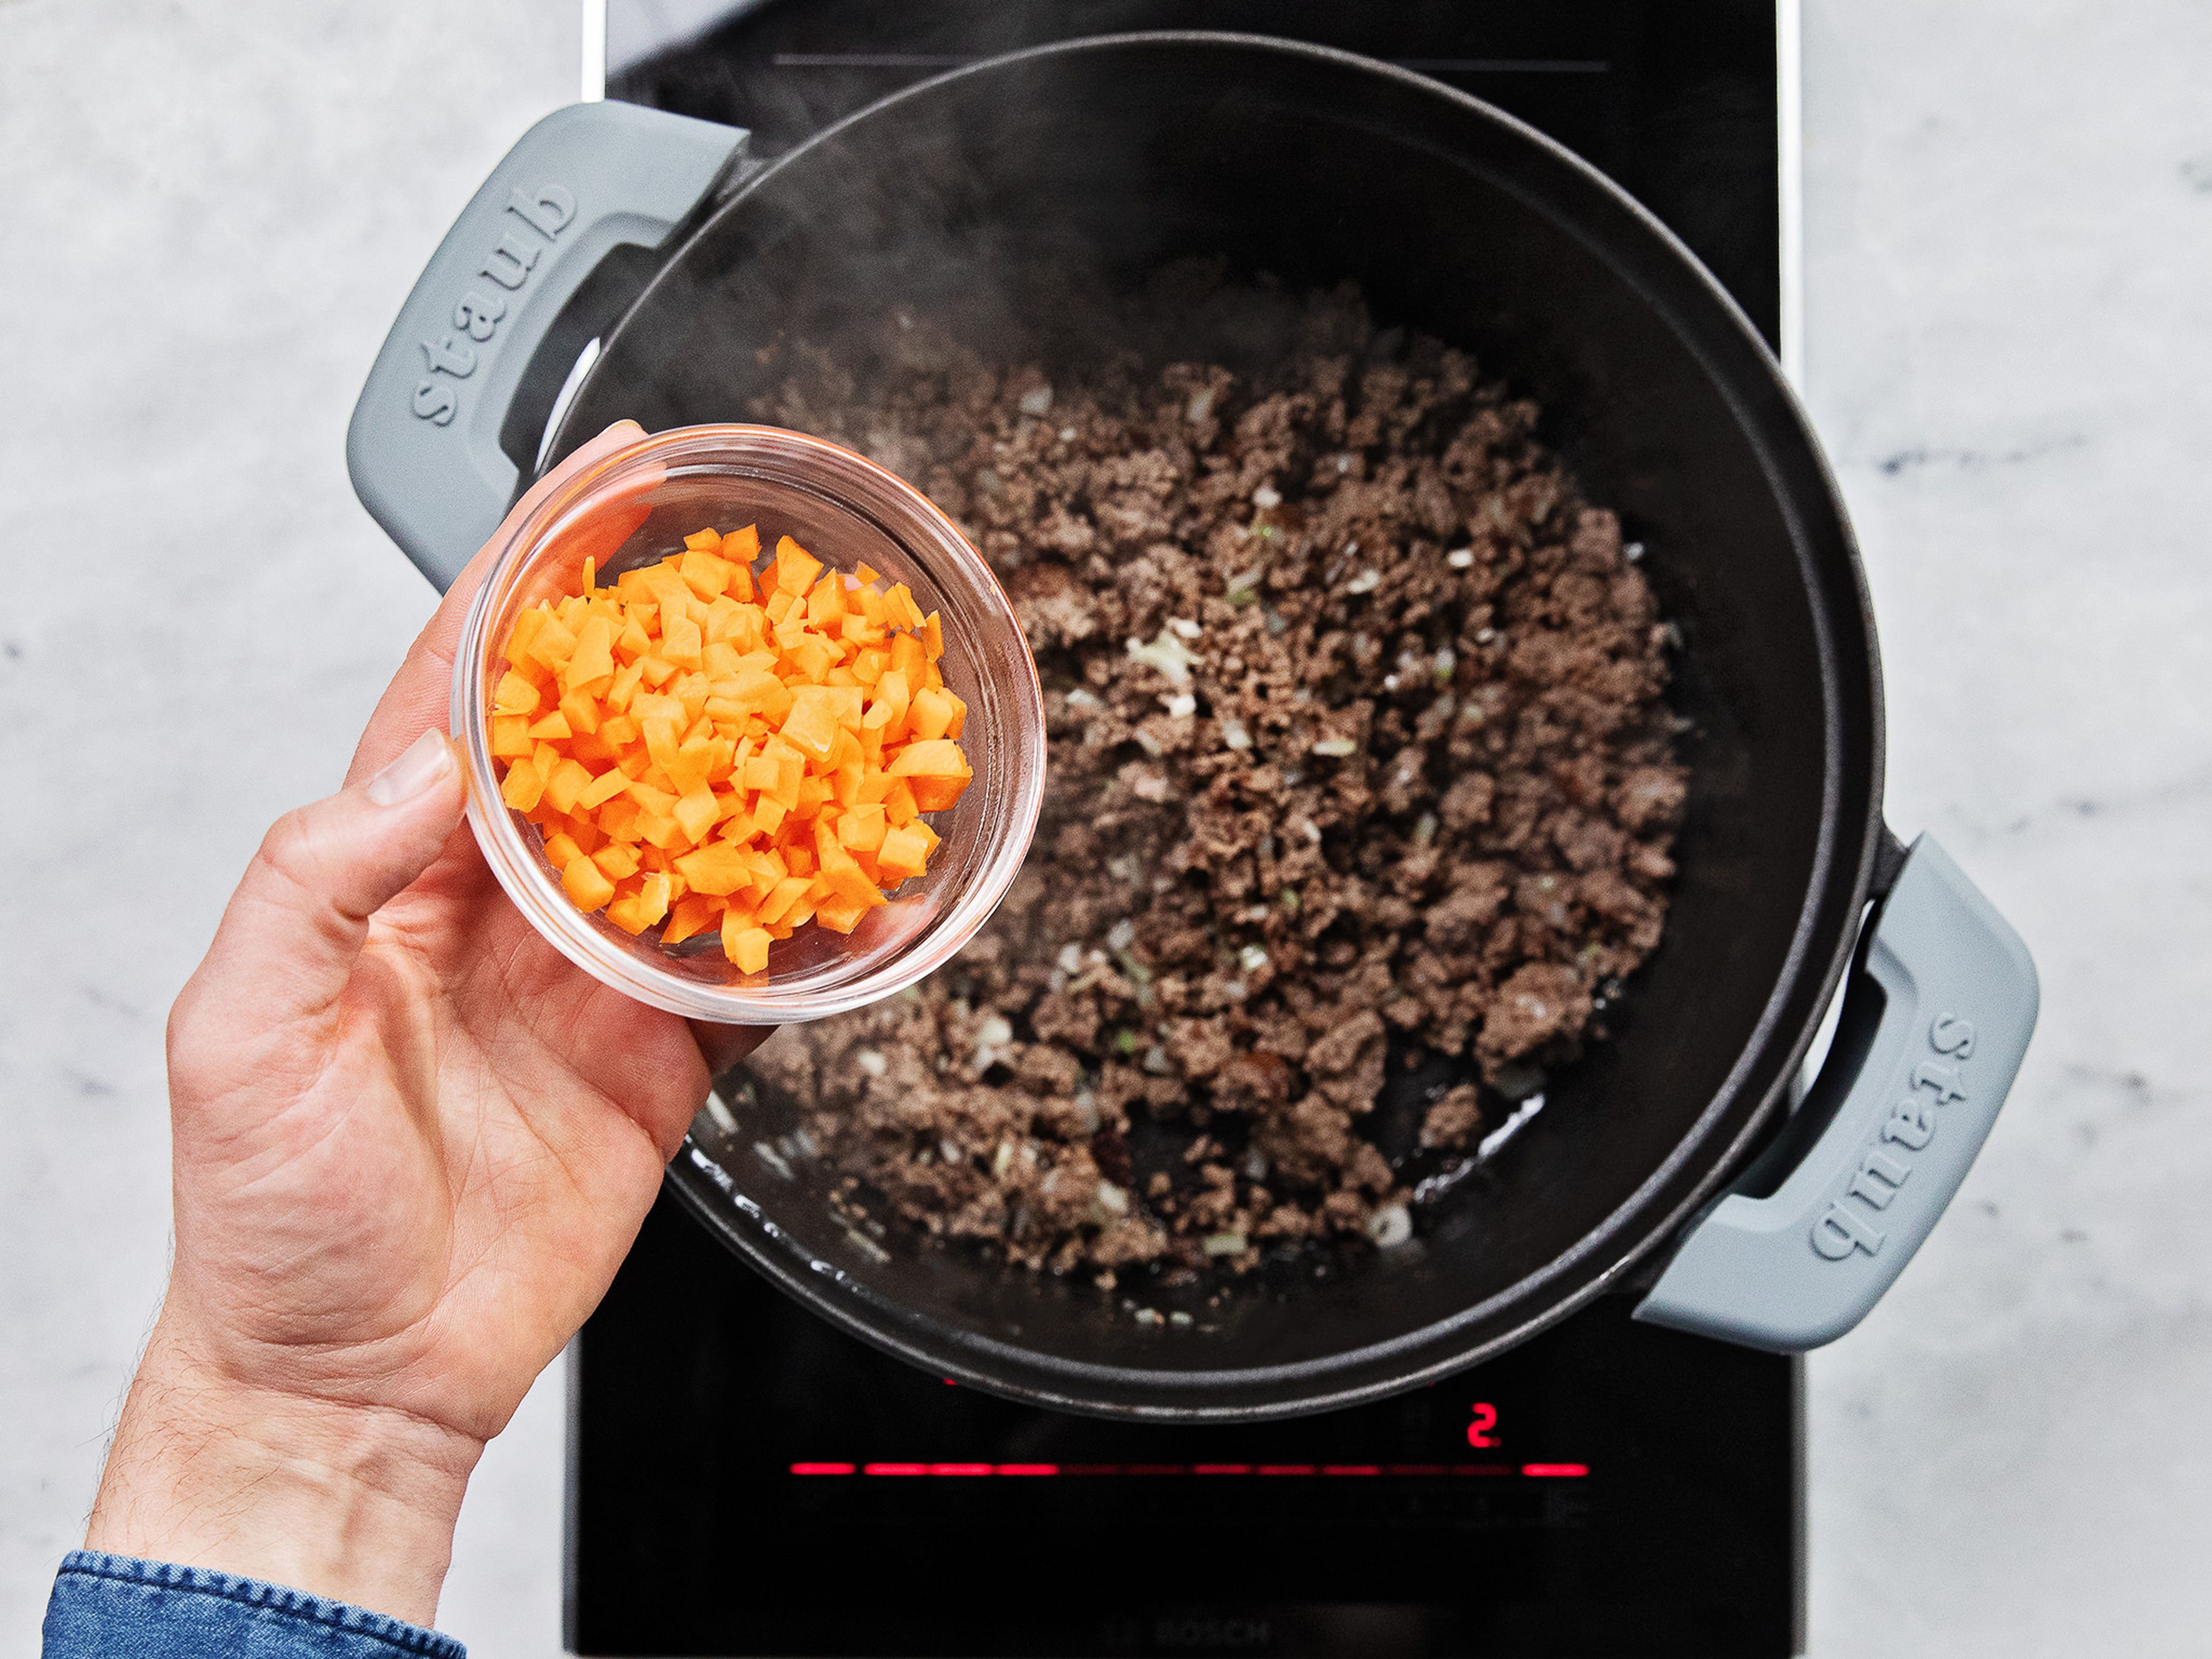 Add oil to a heavy-bottomed pot over medium-high heat. Add beef and let brown. Then add garlic, onion, carrot, and celery. Season with salt and pepper and let cook until onions are translucent.